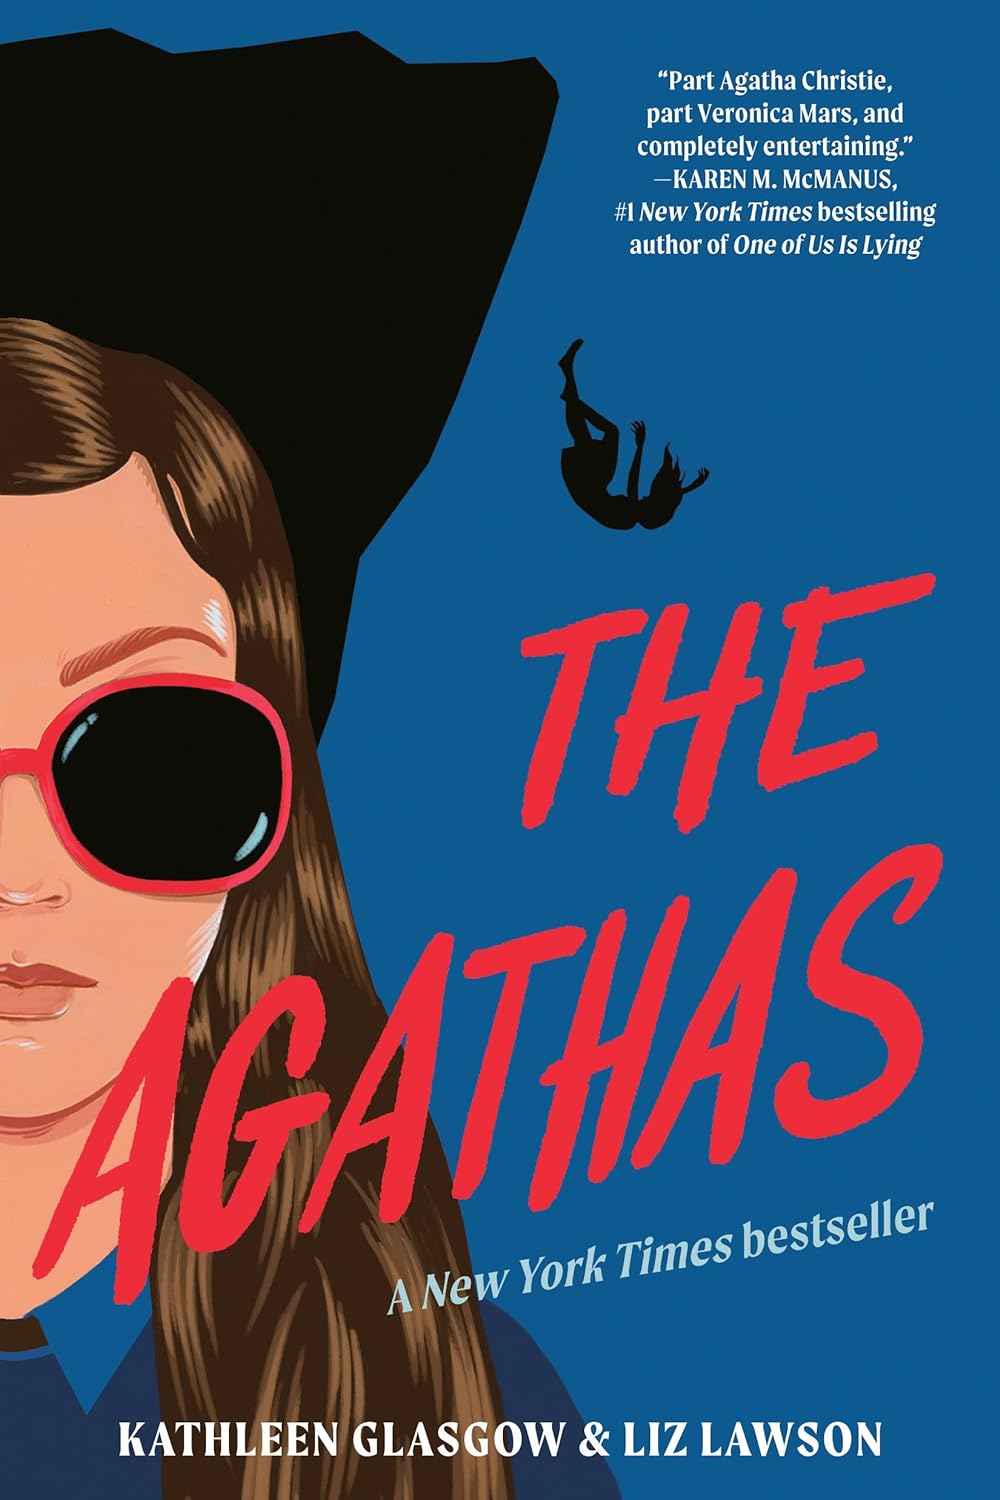 Image of "The Agathas"